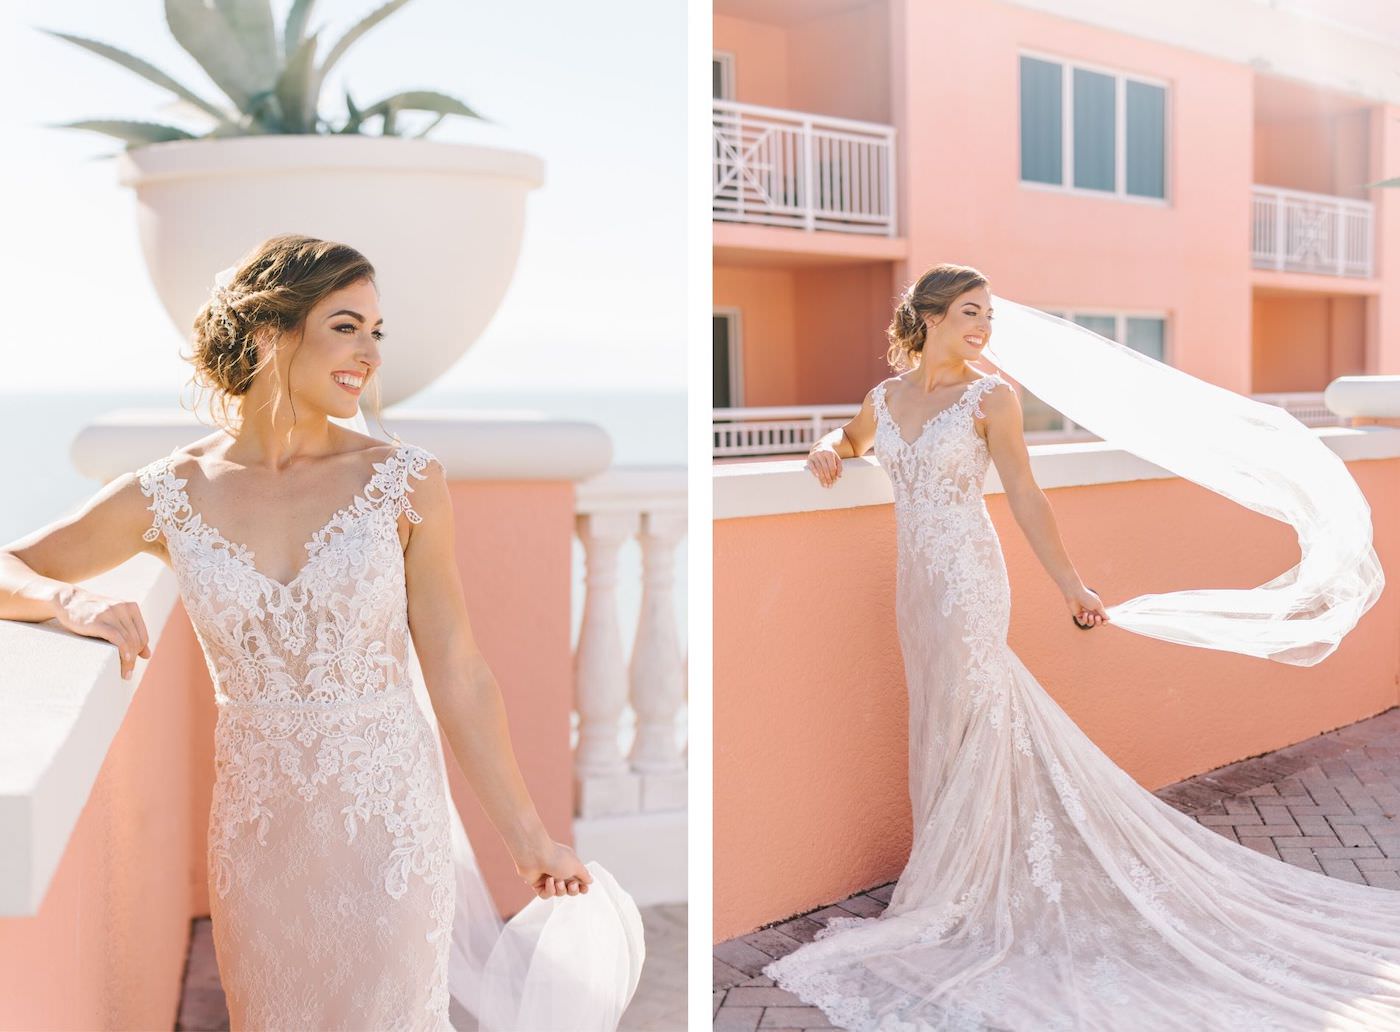 Bridal Rooftop Portrait at Clearwater Wedding Venue Hyatt Regency Beach Hotel | Ivory and Champagne Lilian West Sheath Wedding Dress Bridal Gown with V Neck Off The Shoulder Straps, Scalloped Edge Train and Long Cathedral Veil | Tampa Bay Wedding Photographer Kera Photography